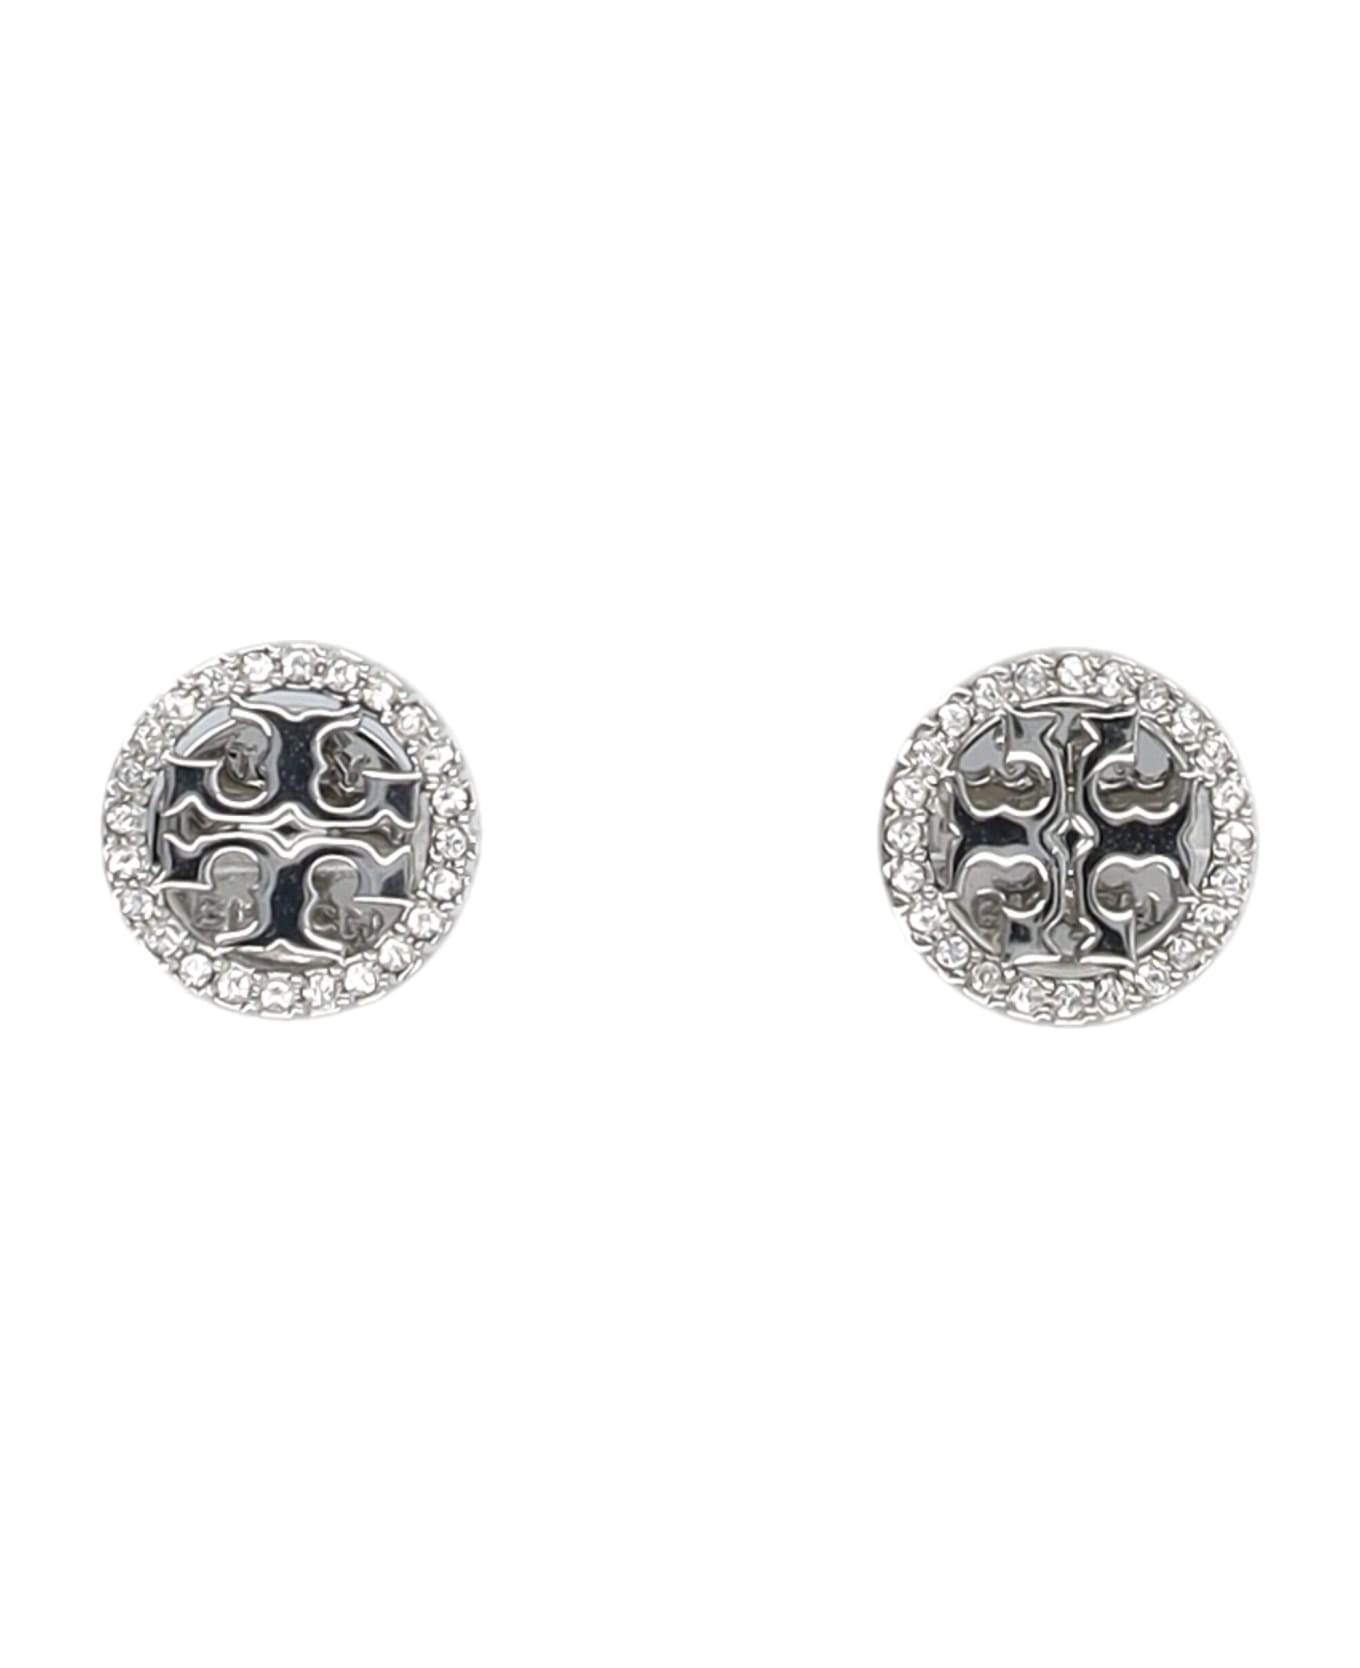 Tory Burch Miller Pave Stud Earring - Tory Silver / Crystal